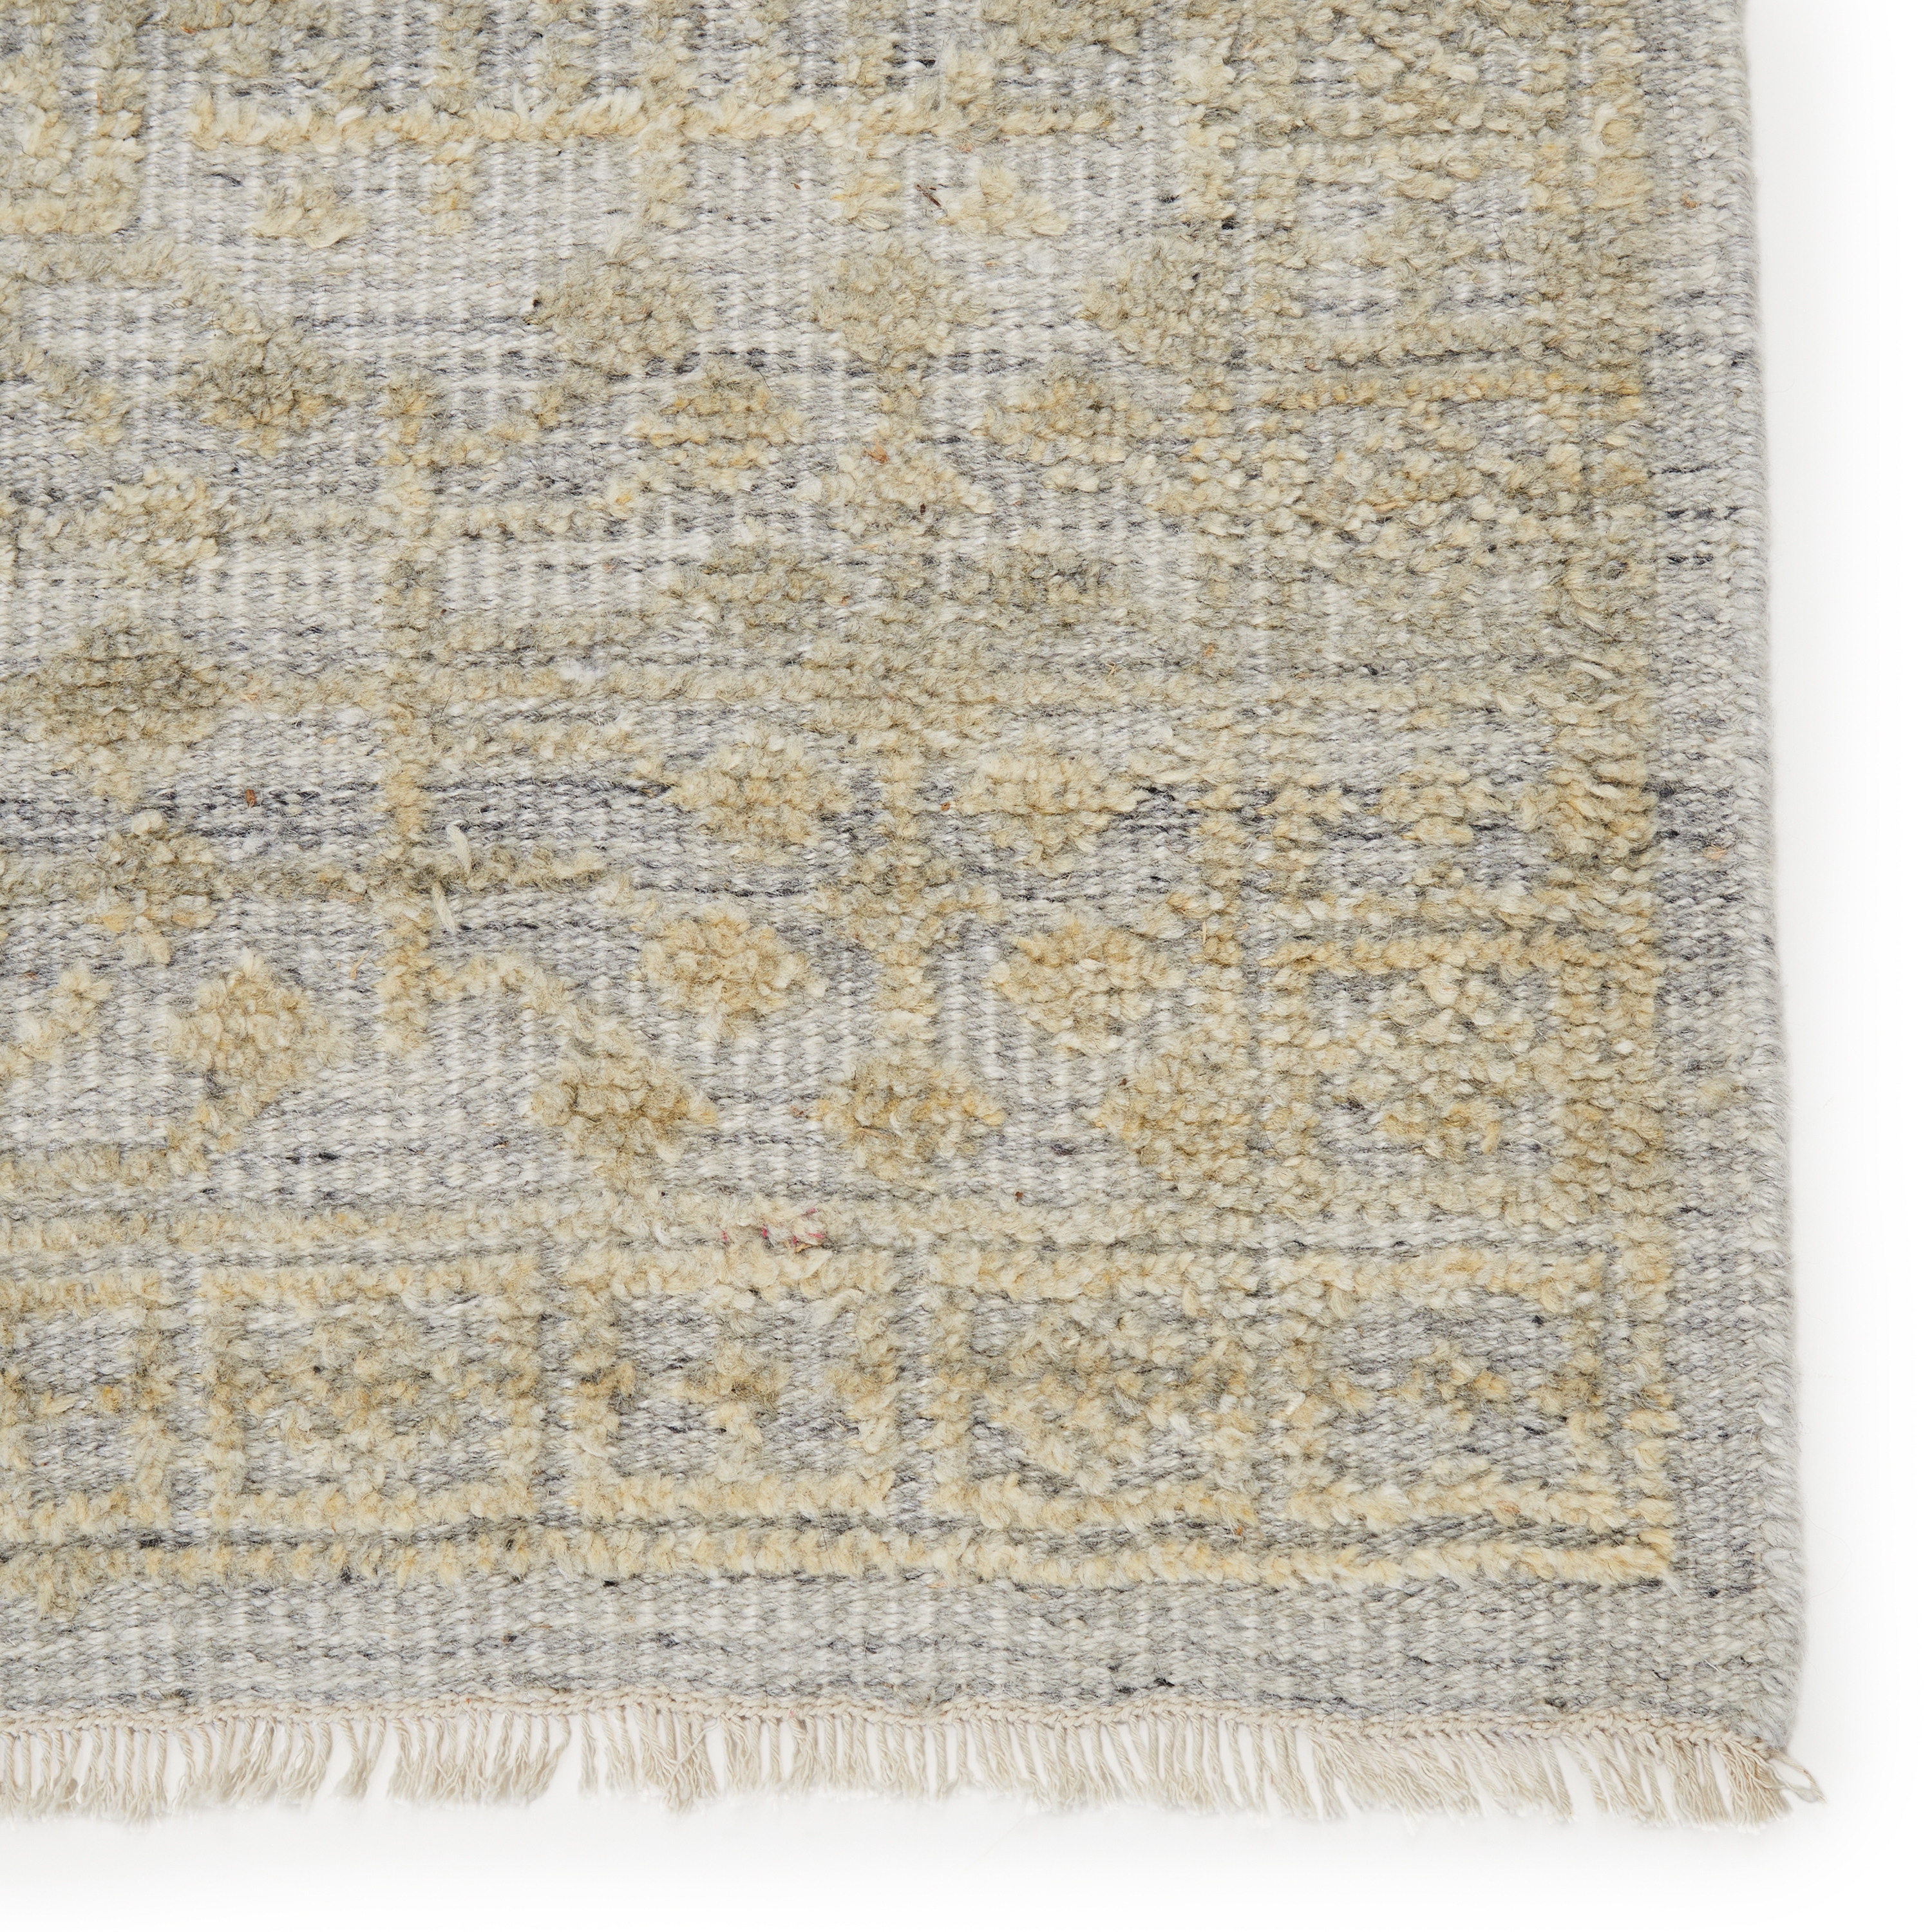 Arinna Hand-Knotted Tribal Beige/ Gray Area Rug (5'X8') - Image 3